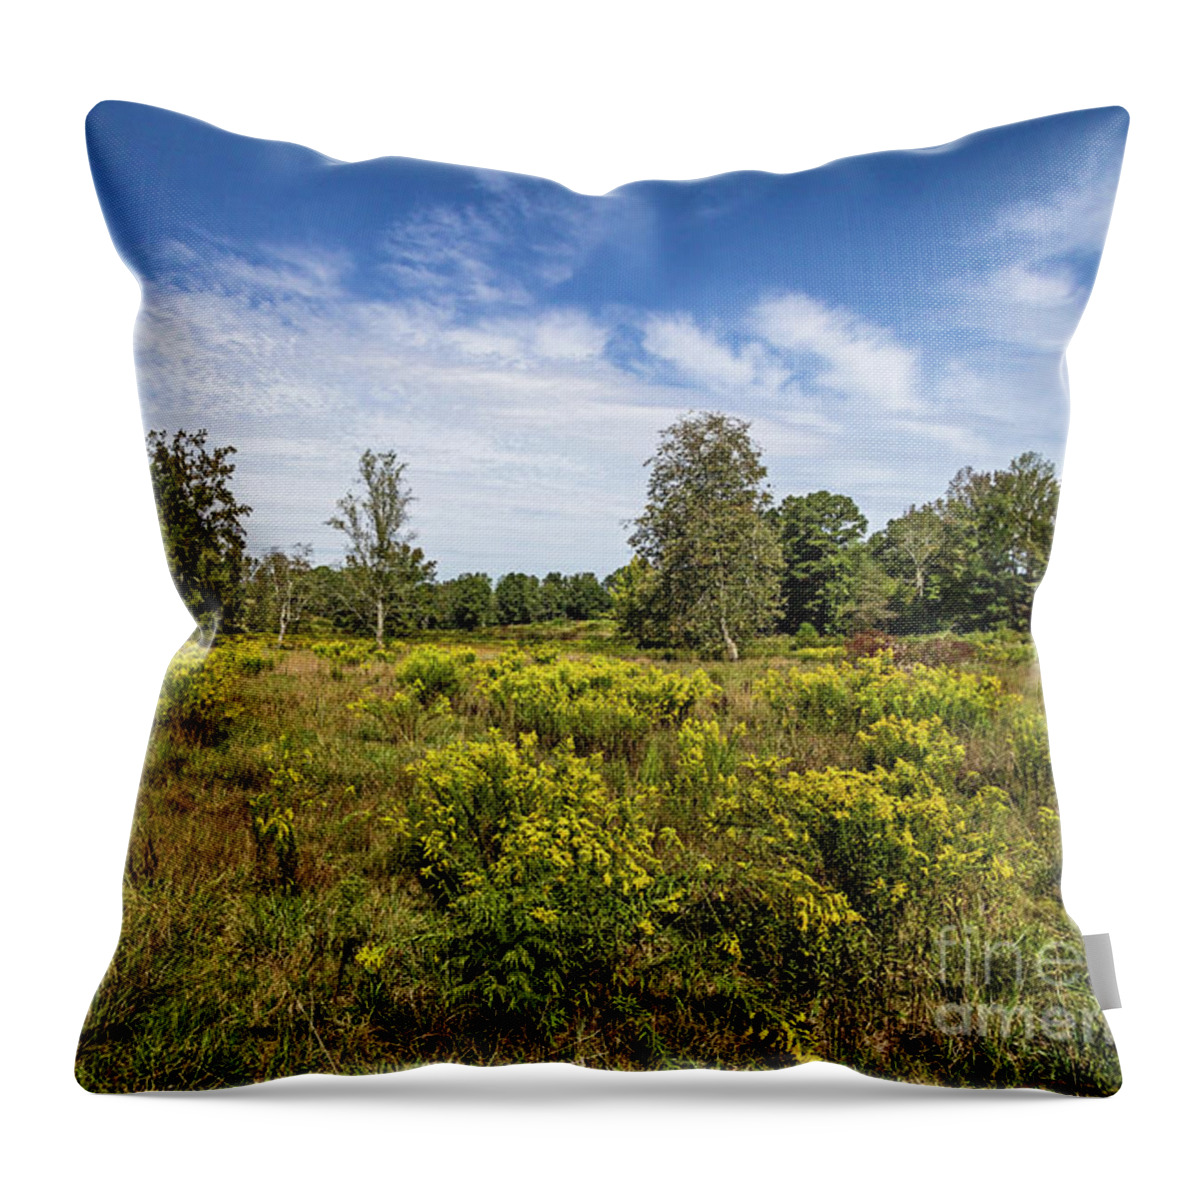 Northern-georgia Throw Pillow featuring the photograph Nothern Georgia by Bernd Laeschke